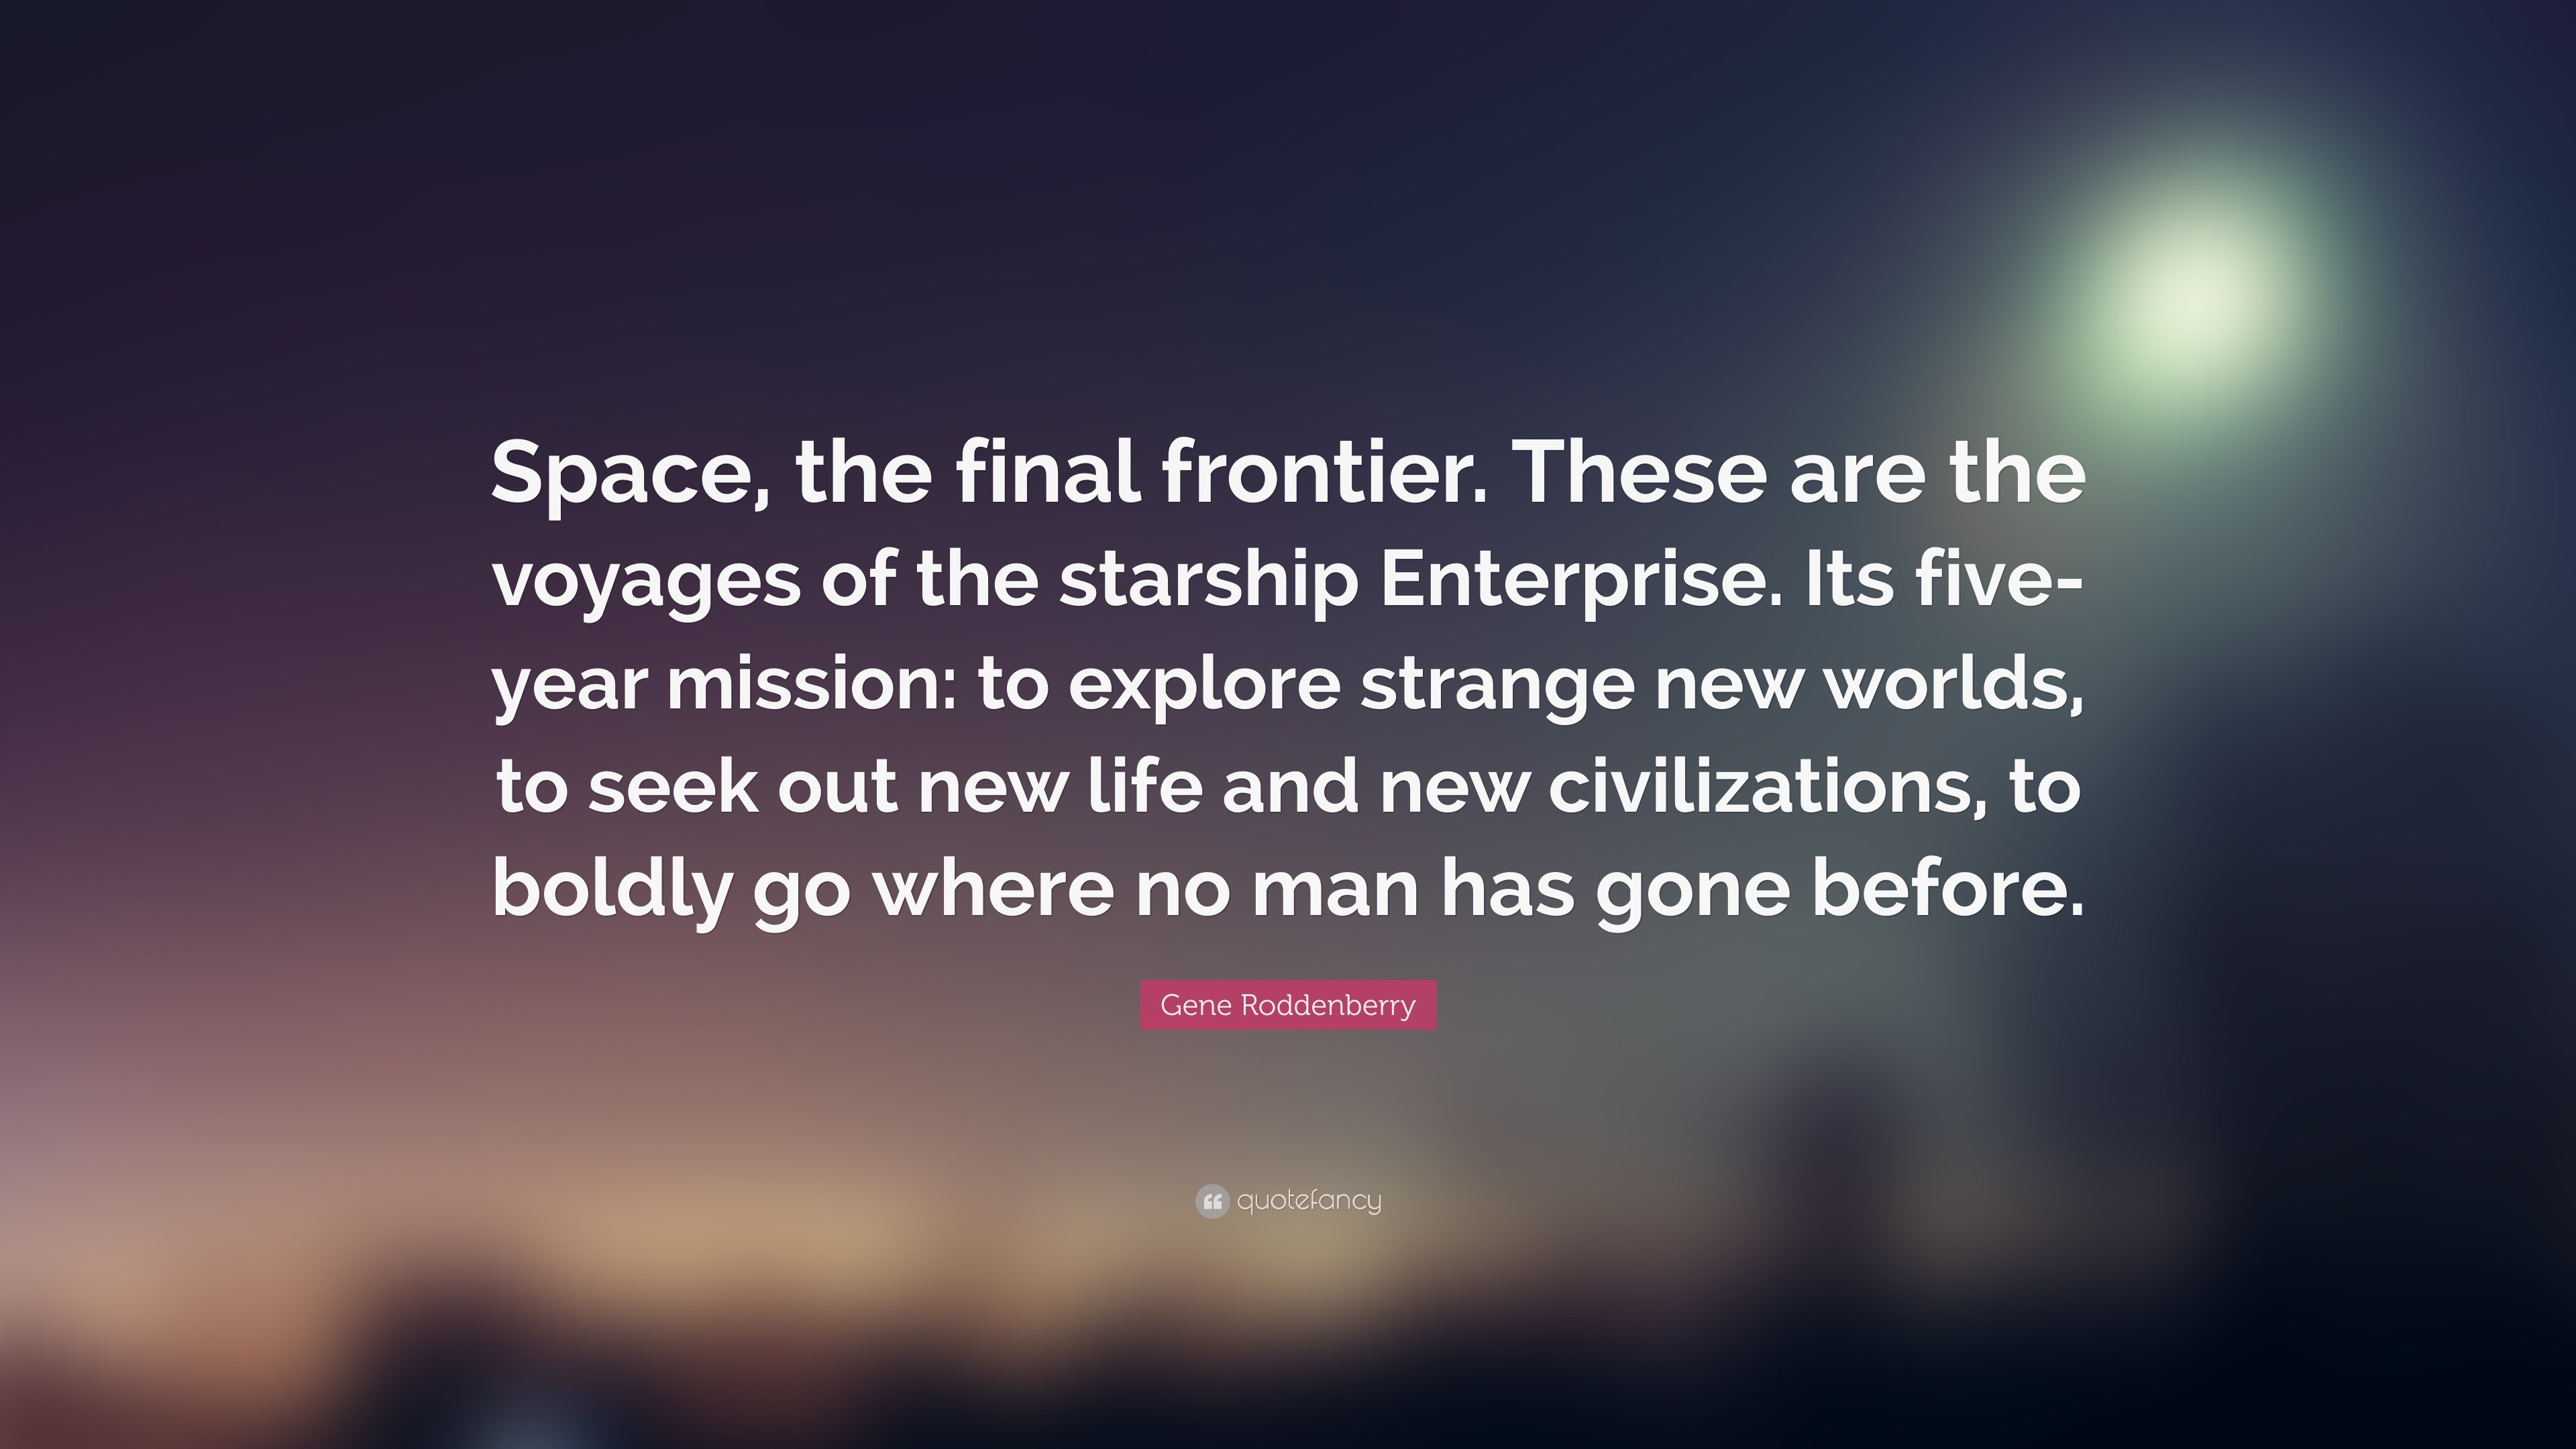 Gene Roddenberry Quotes (38 wallpapers) - Quotefancy